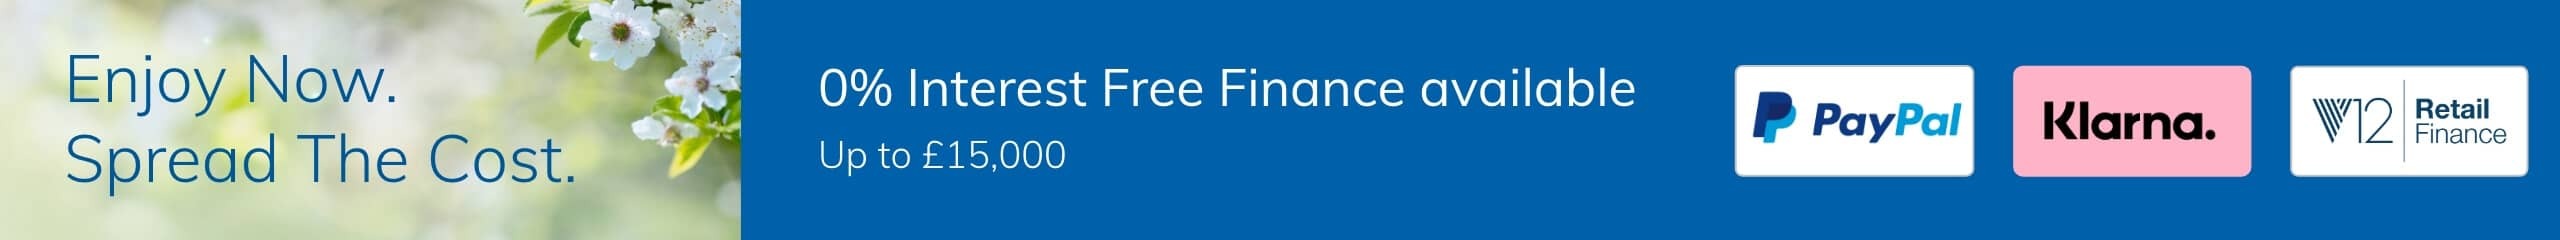 Click here to pay with interest free finance